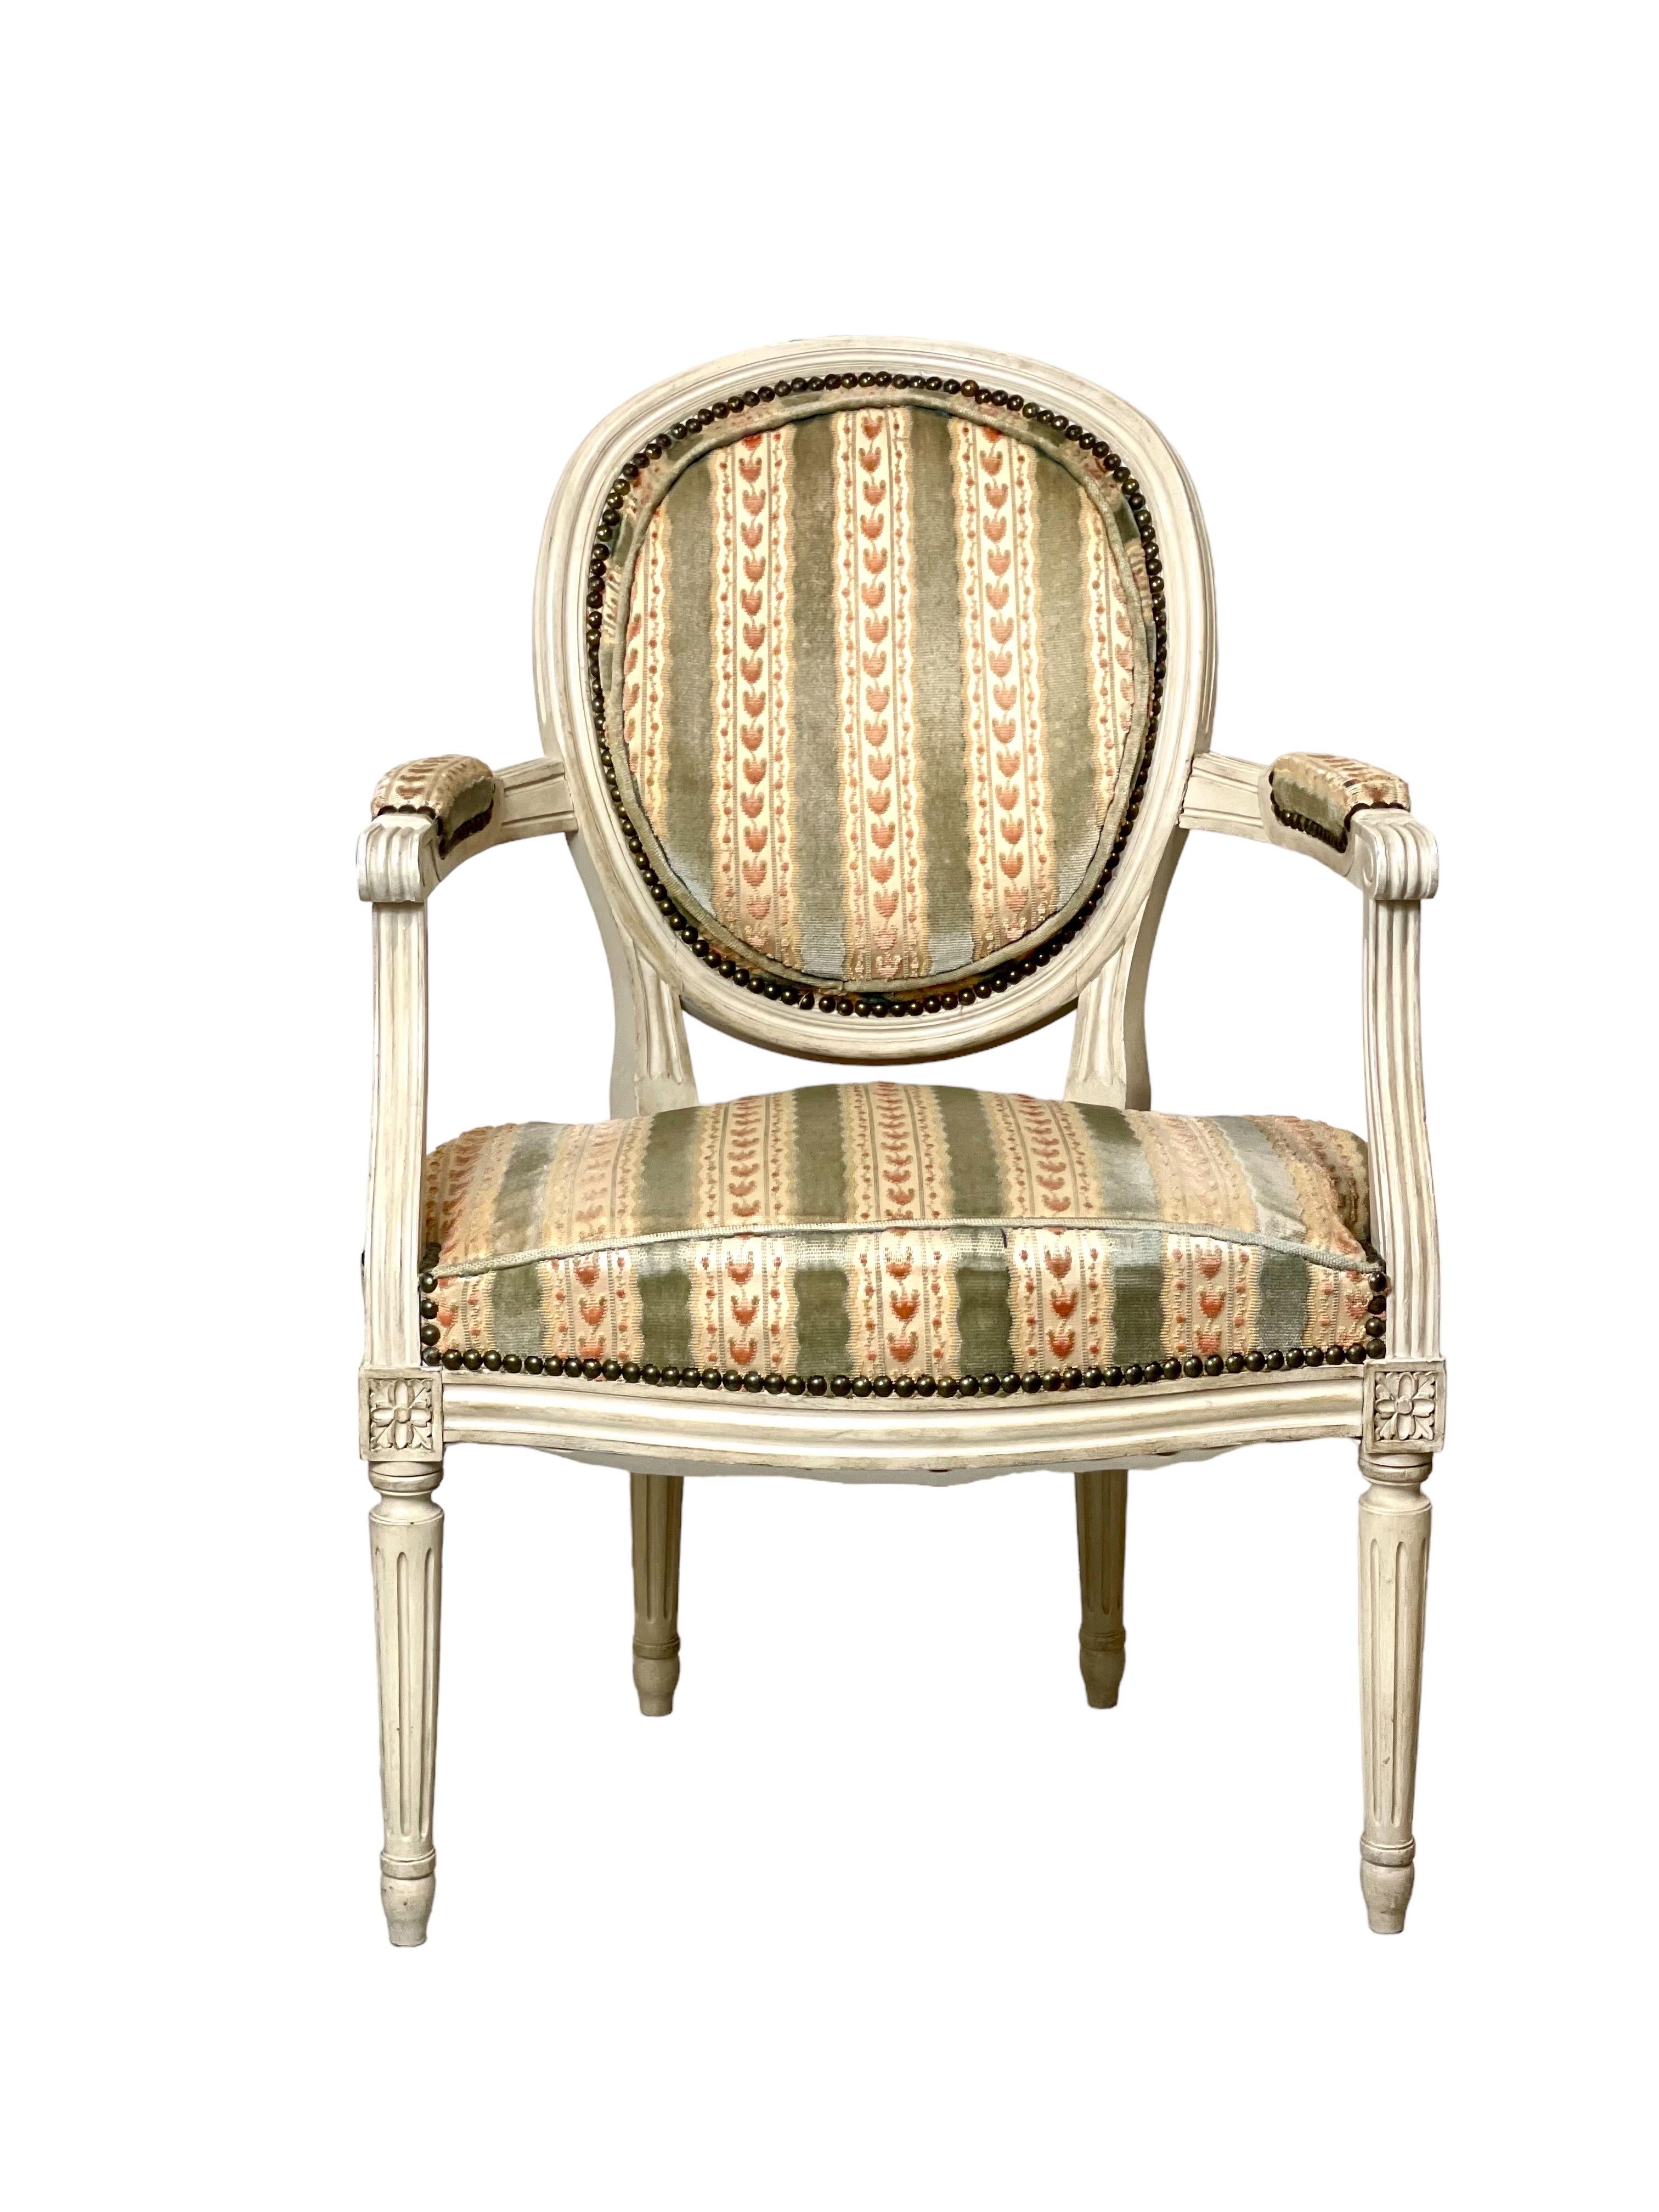 A wonderful pair of medallion-backed Louis XVI style 'Fauteuil Cabriolet' armchairs, in white lacquered wood. Armrests are partially upholstered and reeded, and each chair is raised on four elegant, fluted legs with carved rosettes at the crest. The